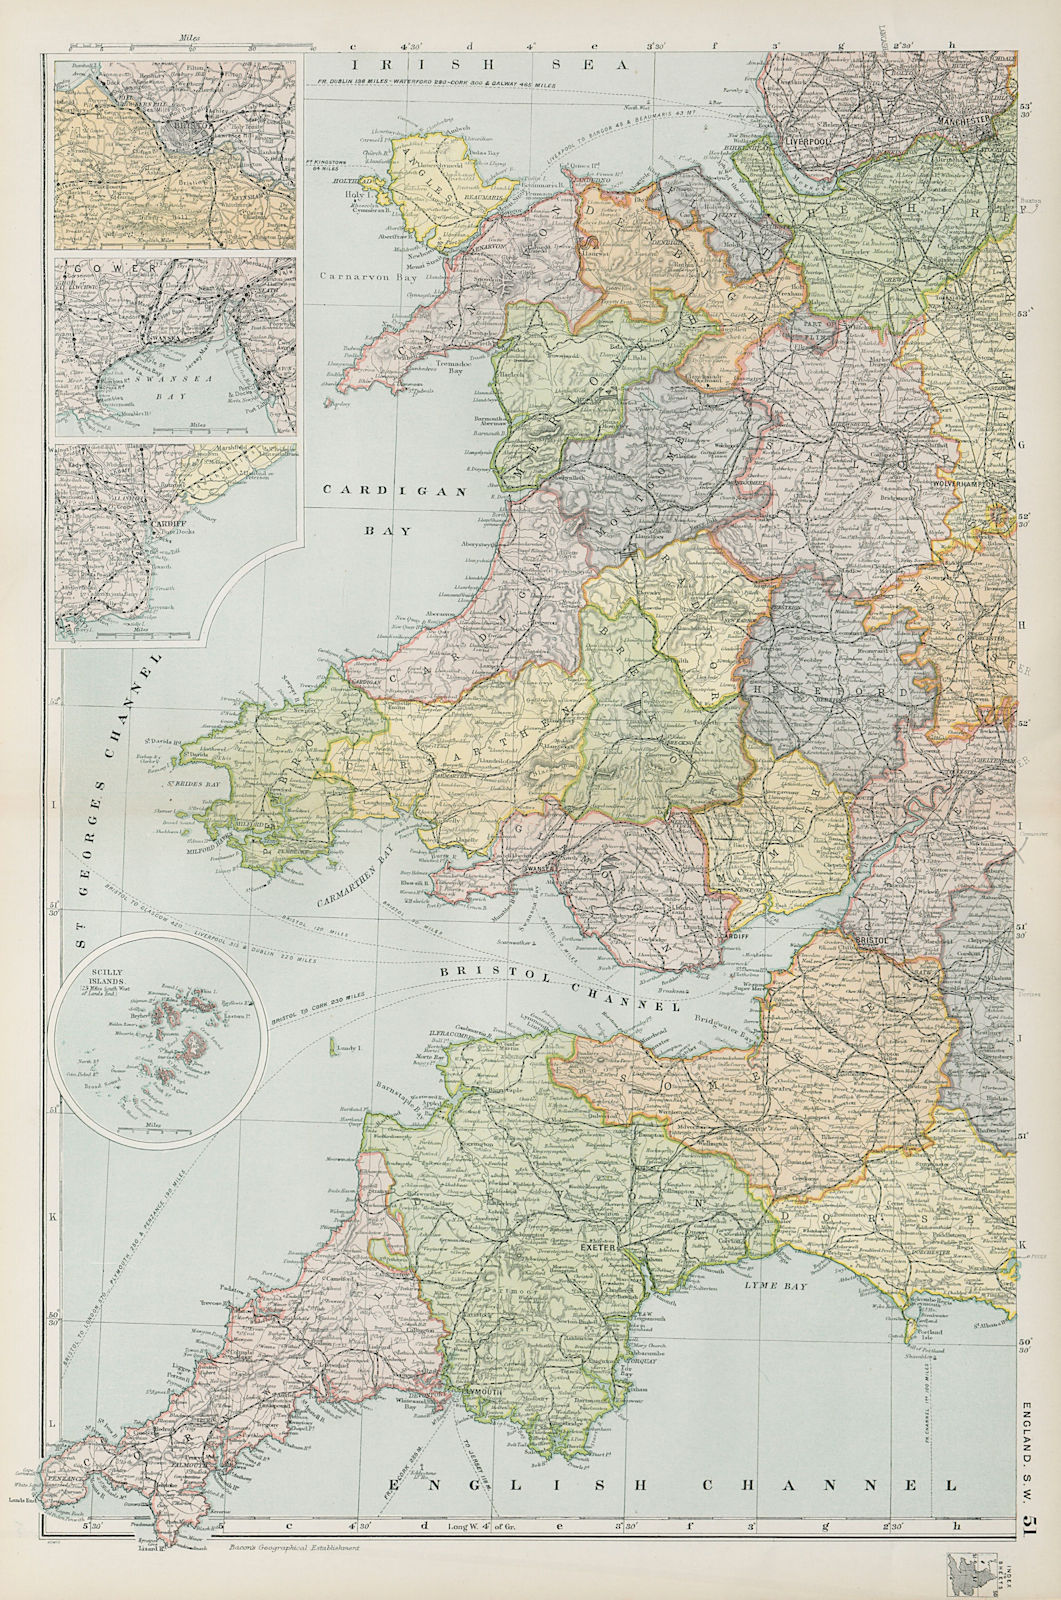 Associate Product WALES & SOUTH WEST ENGLAND. inset Bristol Swansea Cardiff. BACON 1900 old map